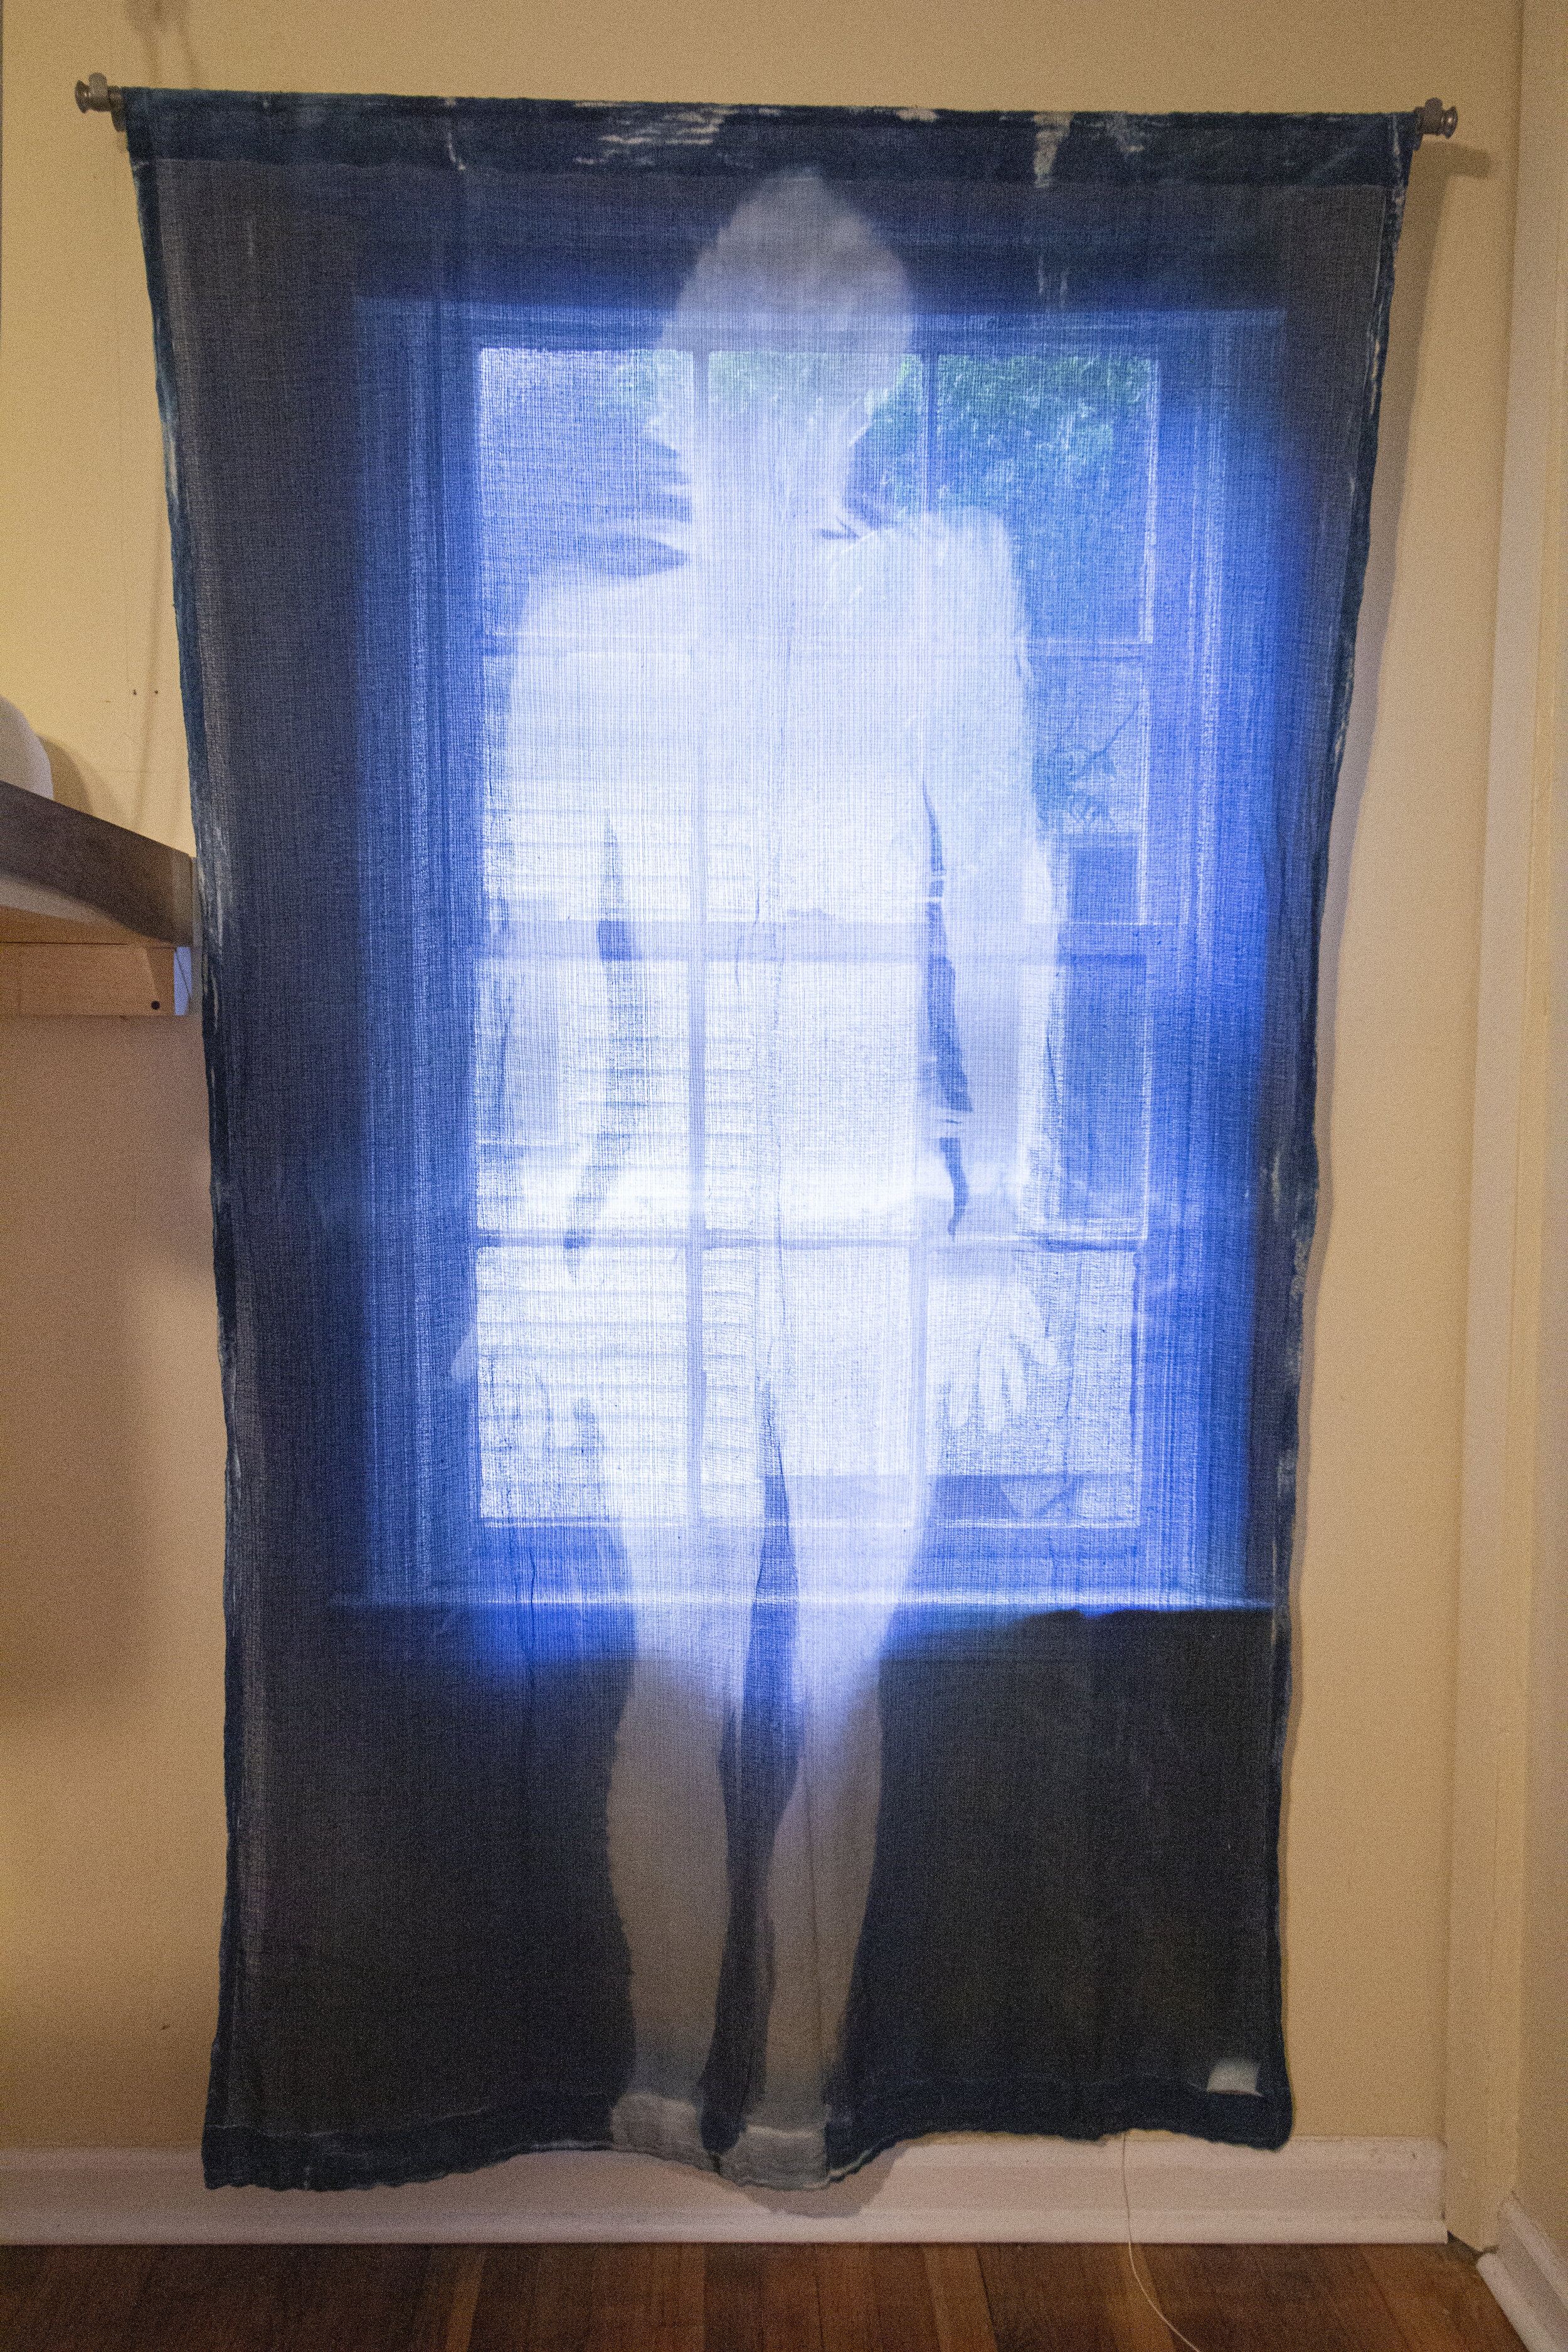 Stasis [early evening], 2020, cotton curtain, cyanotype solution, curtain rod, and hardware, 55 x 84 inches